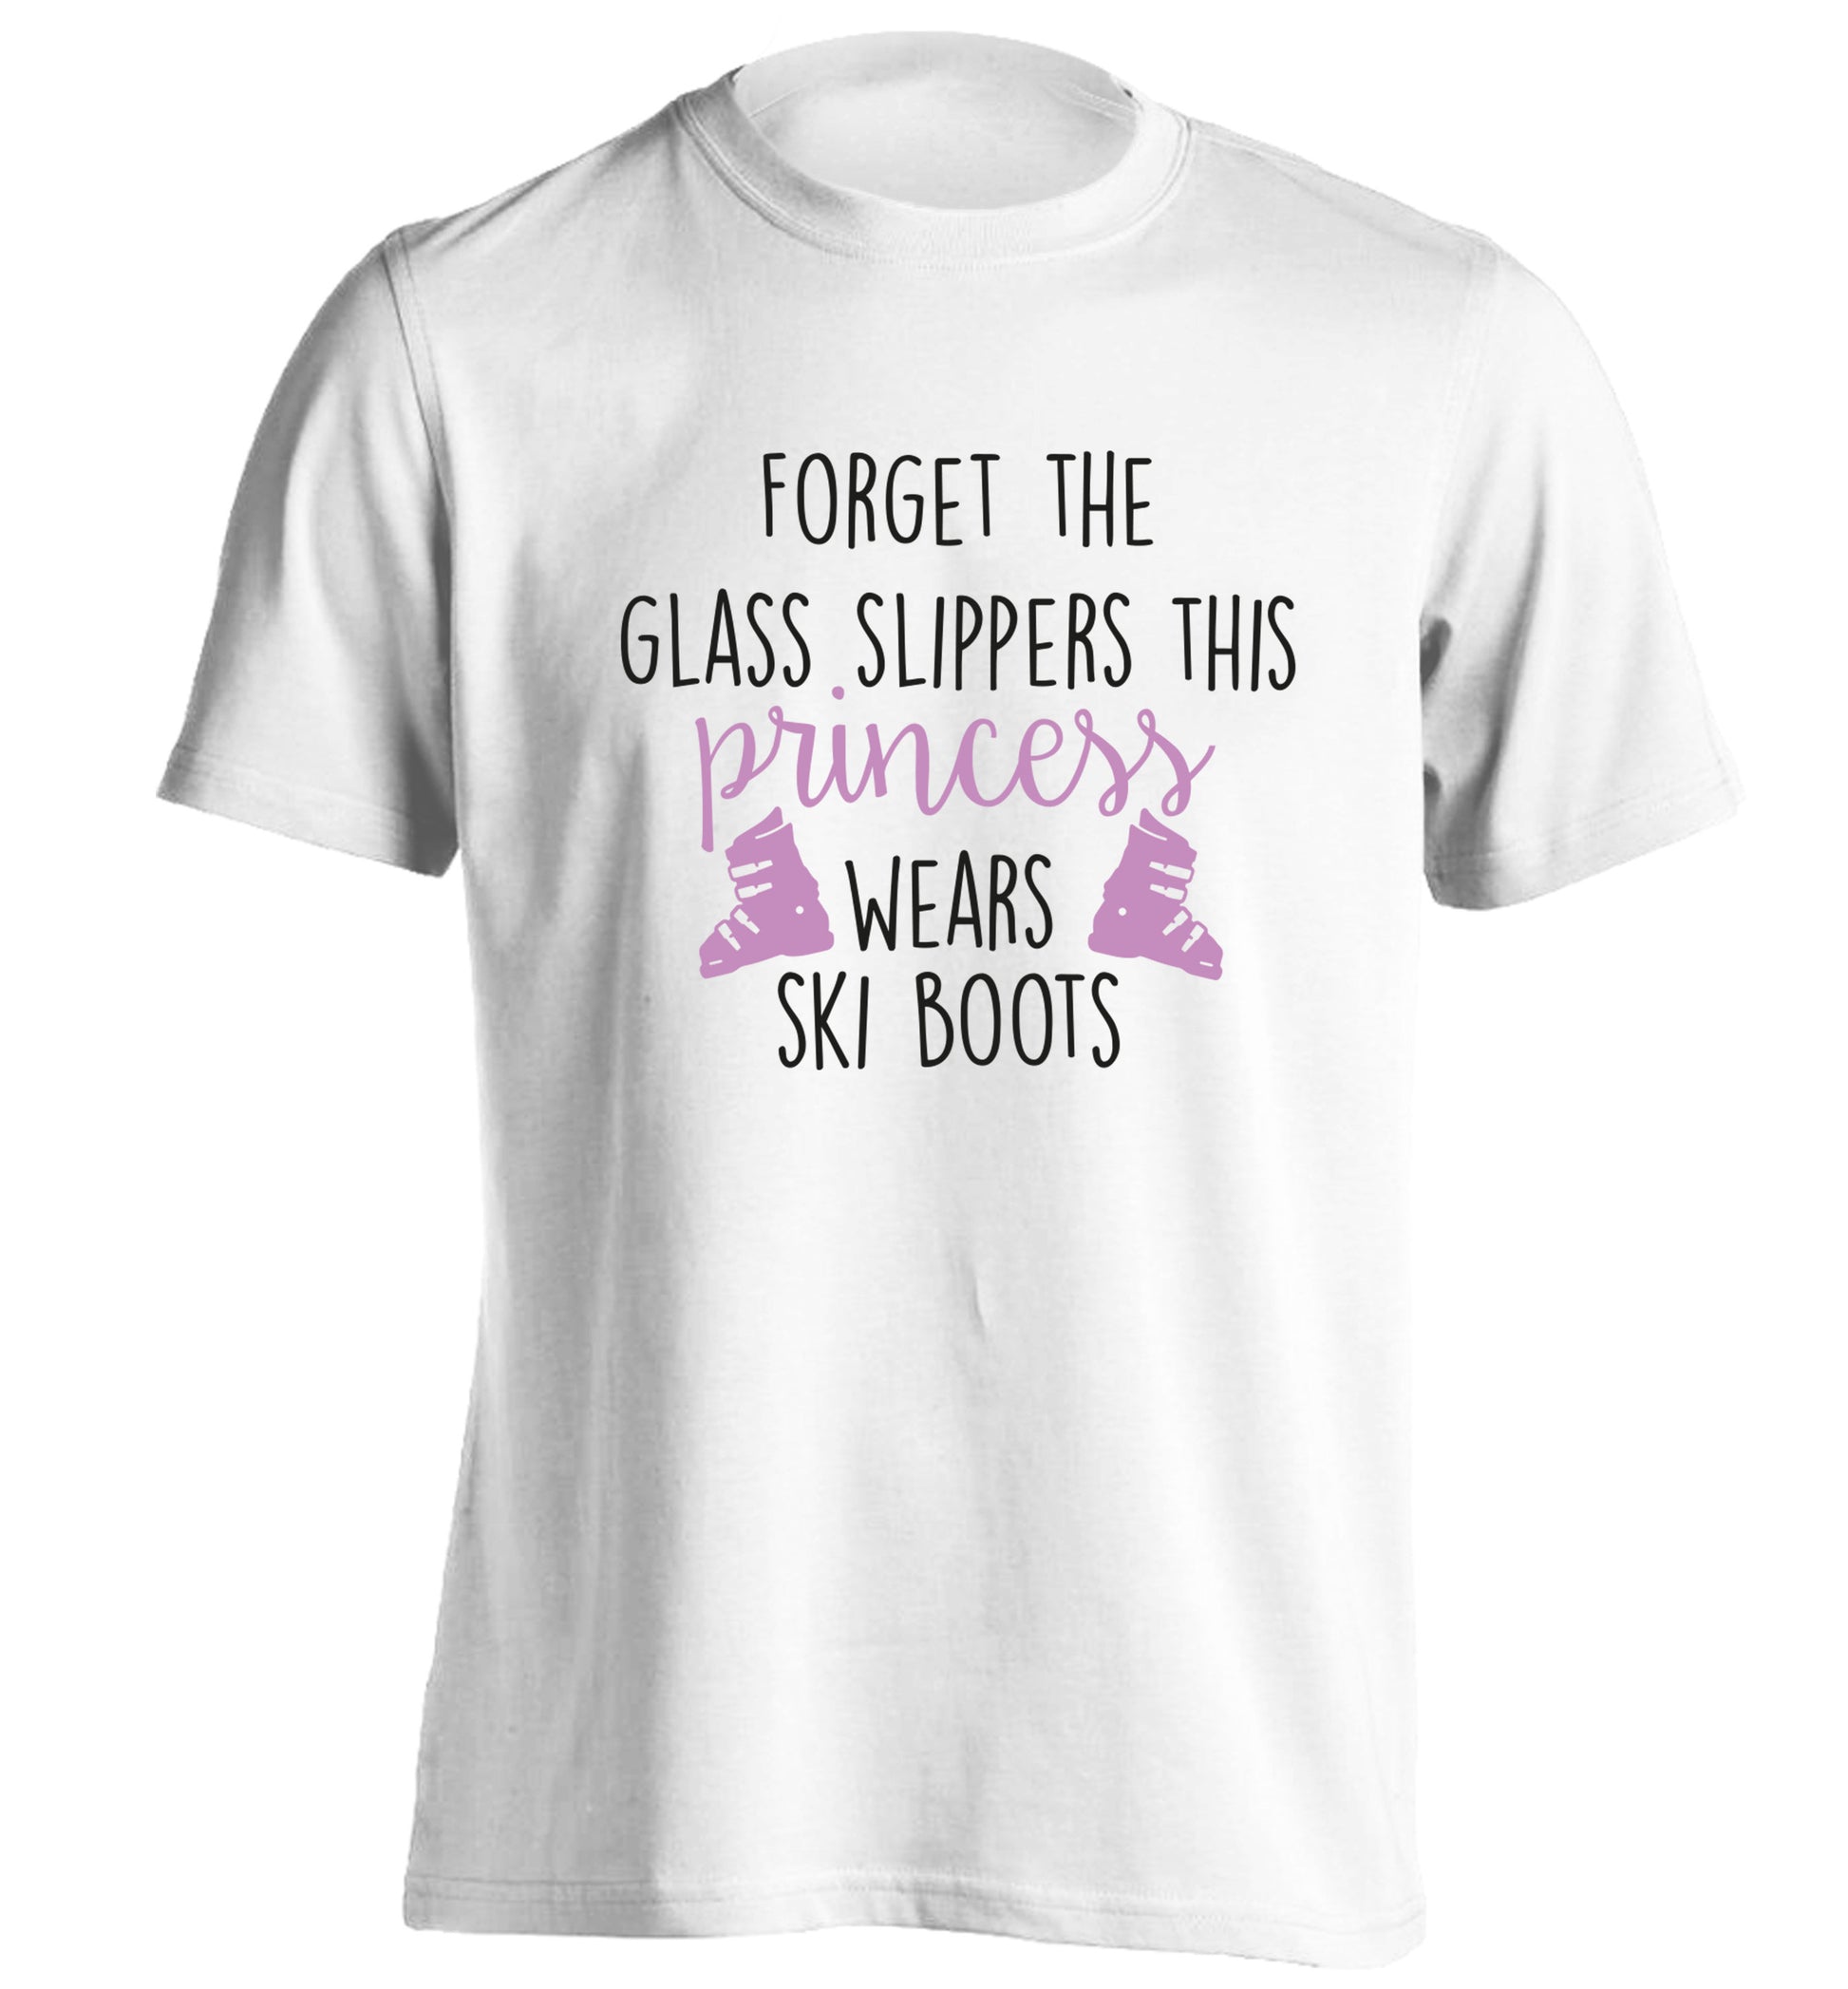 Forget the glass slippers this princess wears ski boots adults unisex white Tshirt 2XL